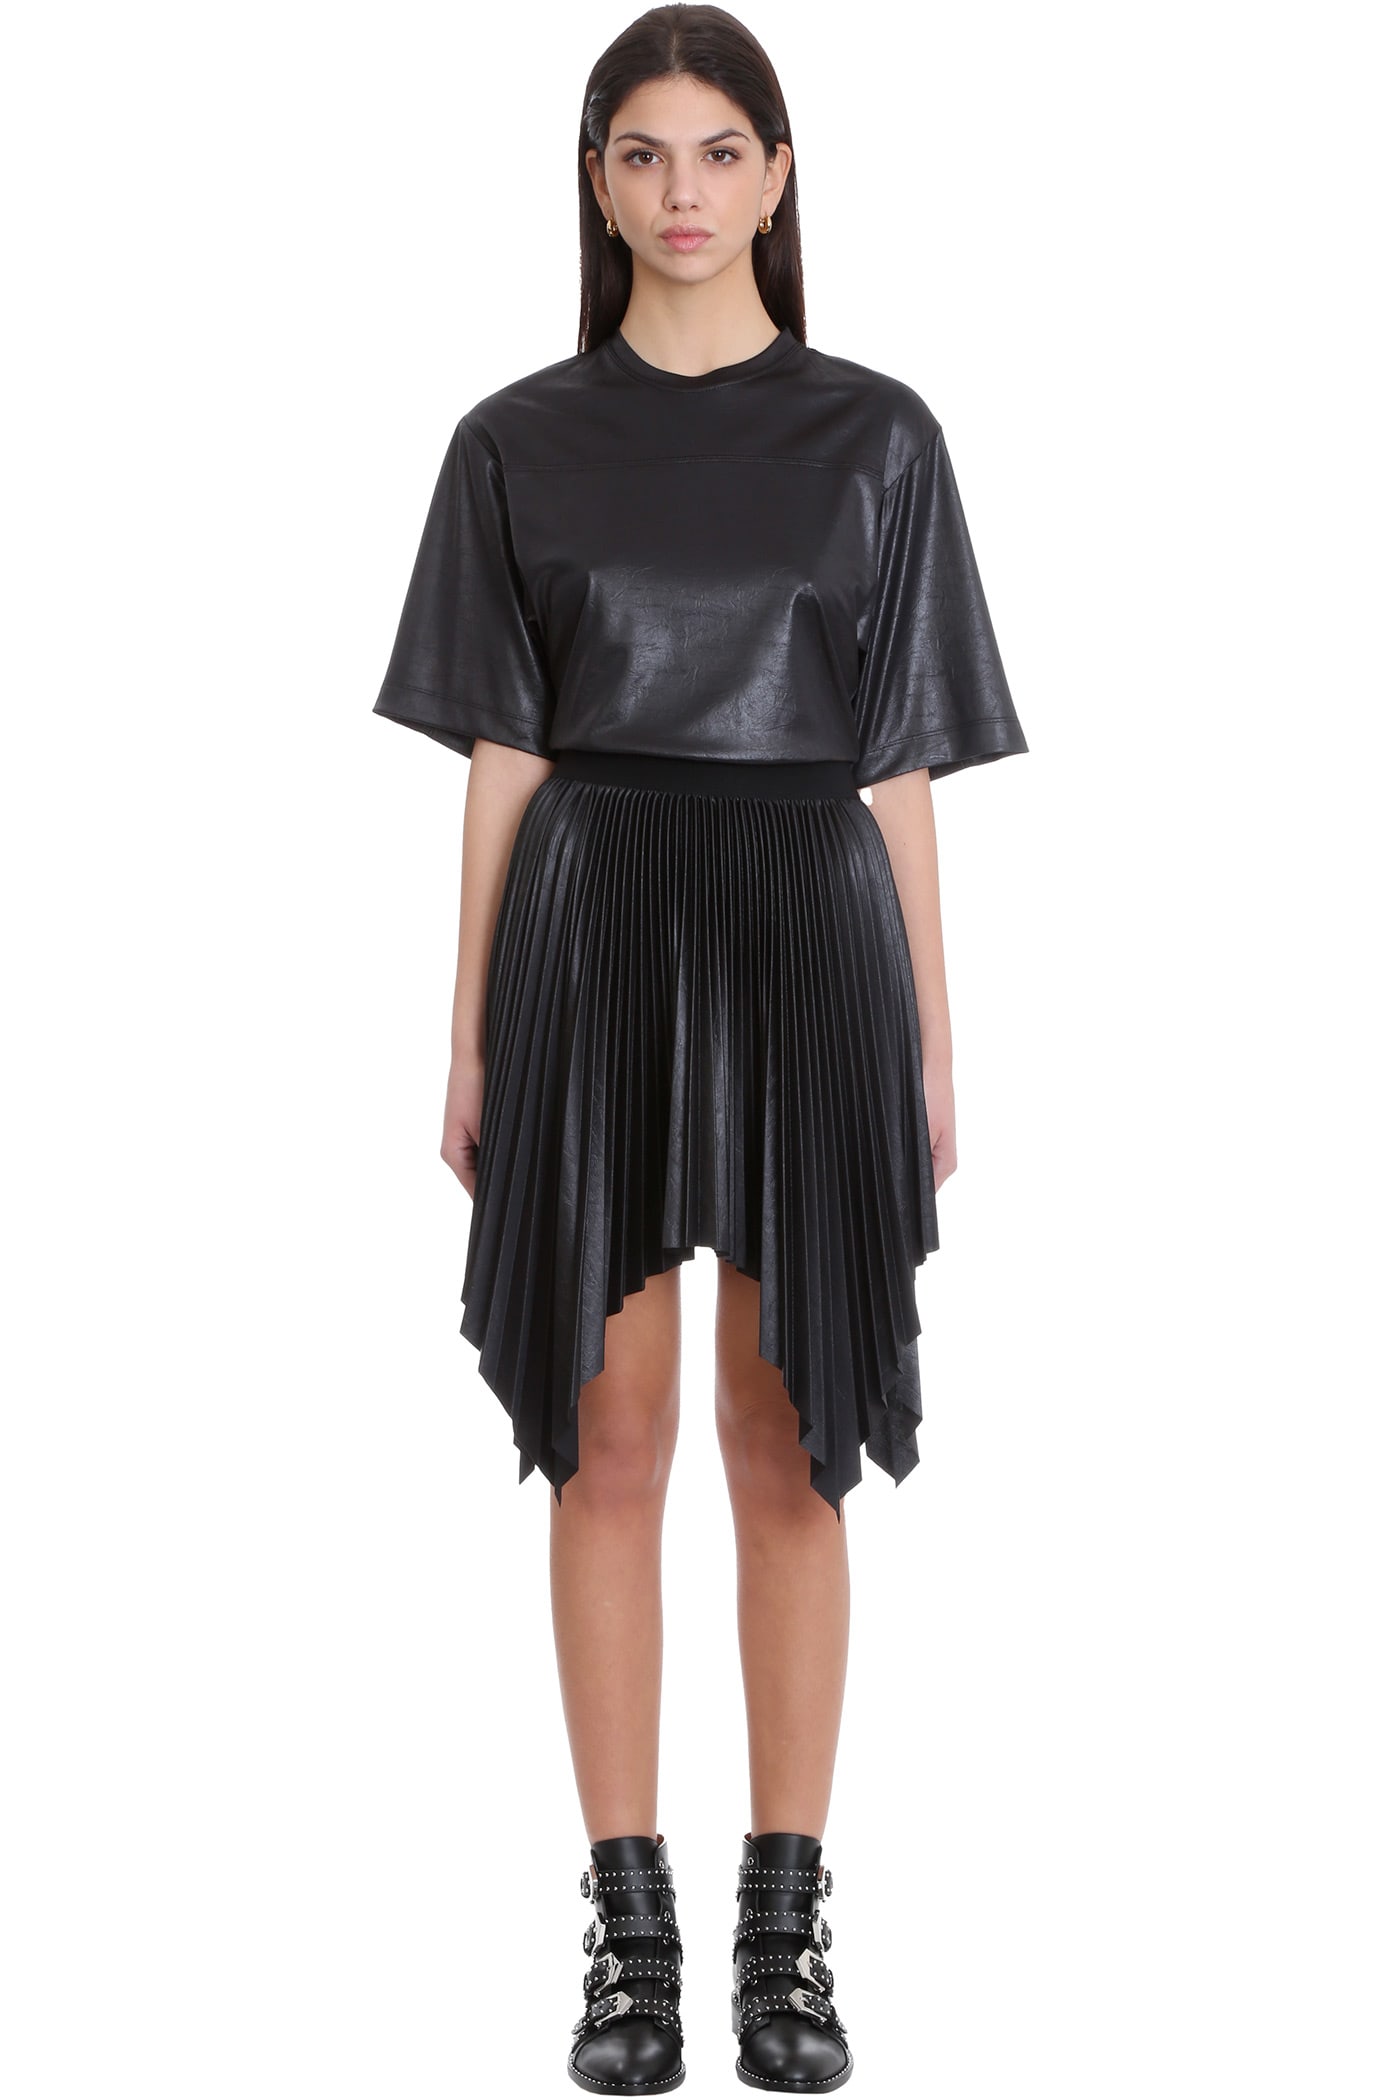 Givenchy Dress In Black Polyester